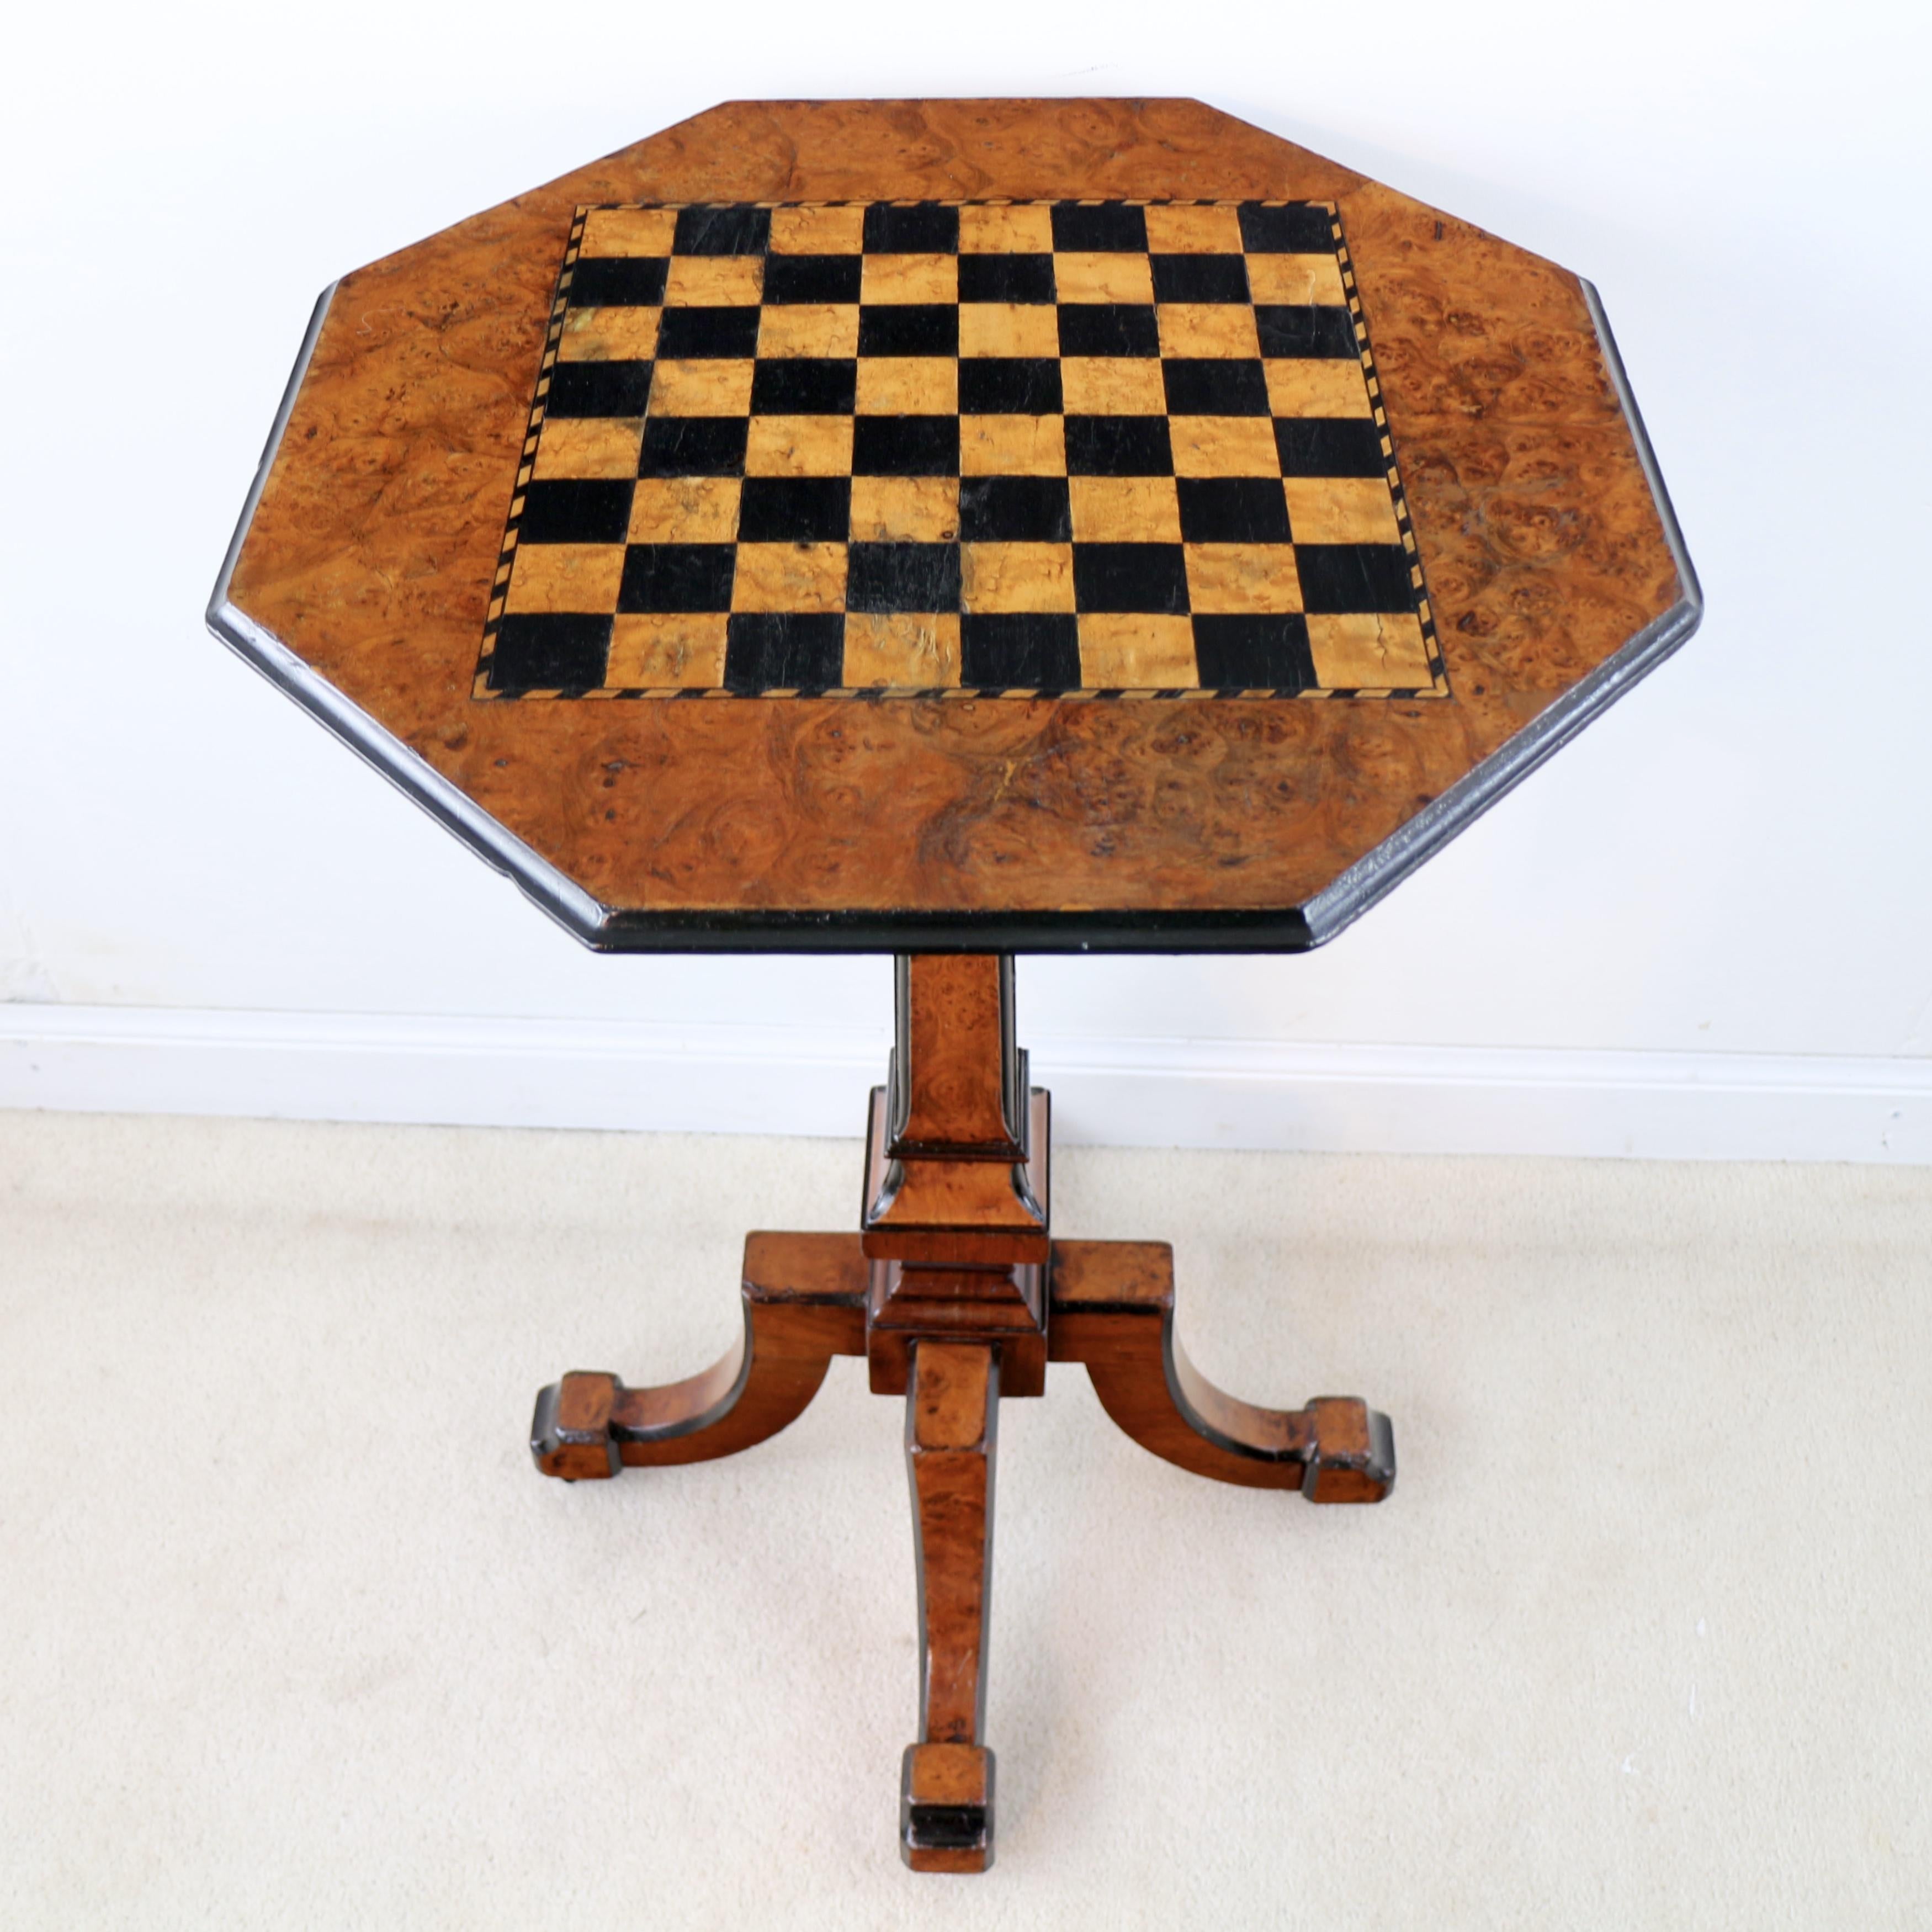 Victorian Antique Irish Killarney Yew Inlaid Chess Top Games Occasional Table